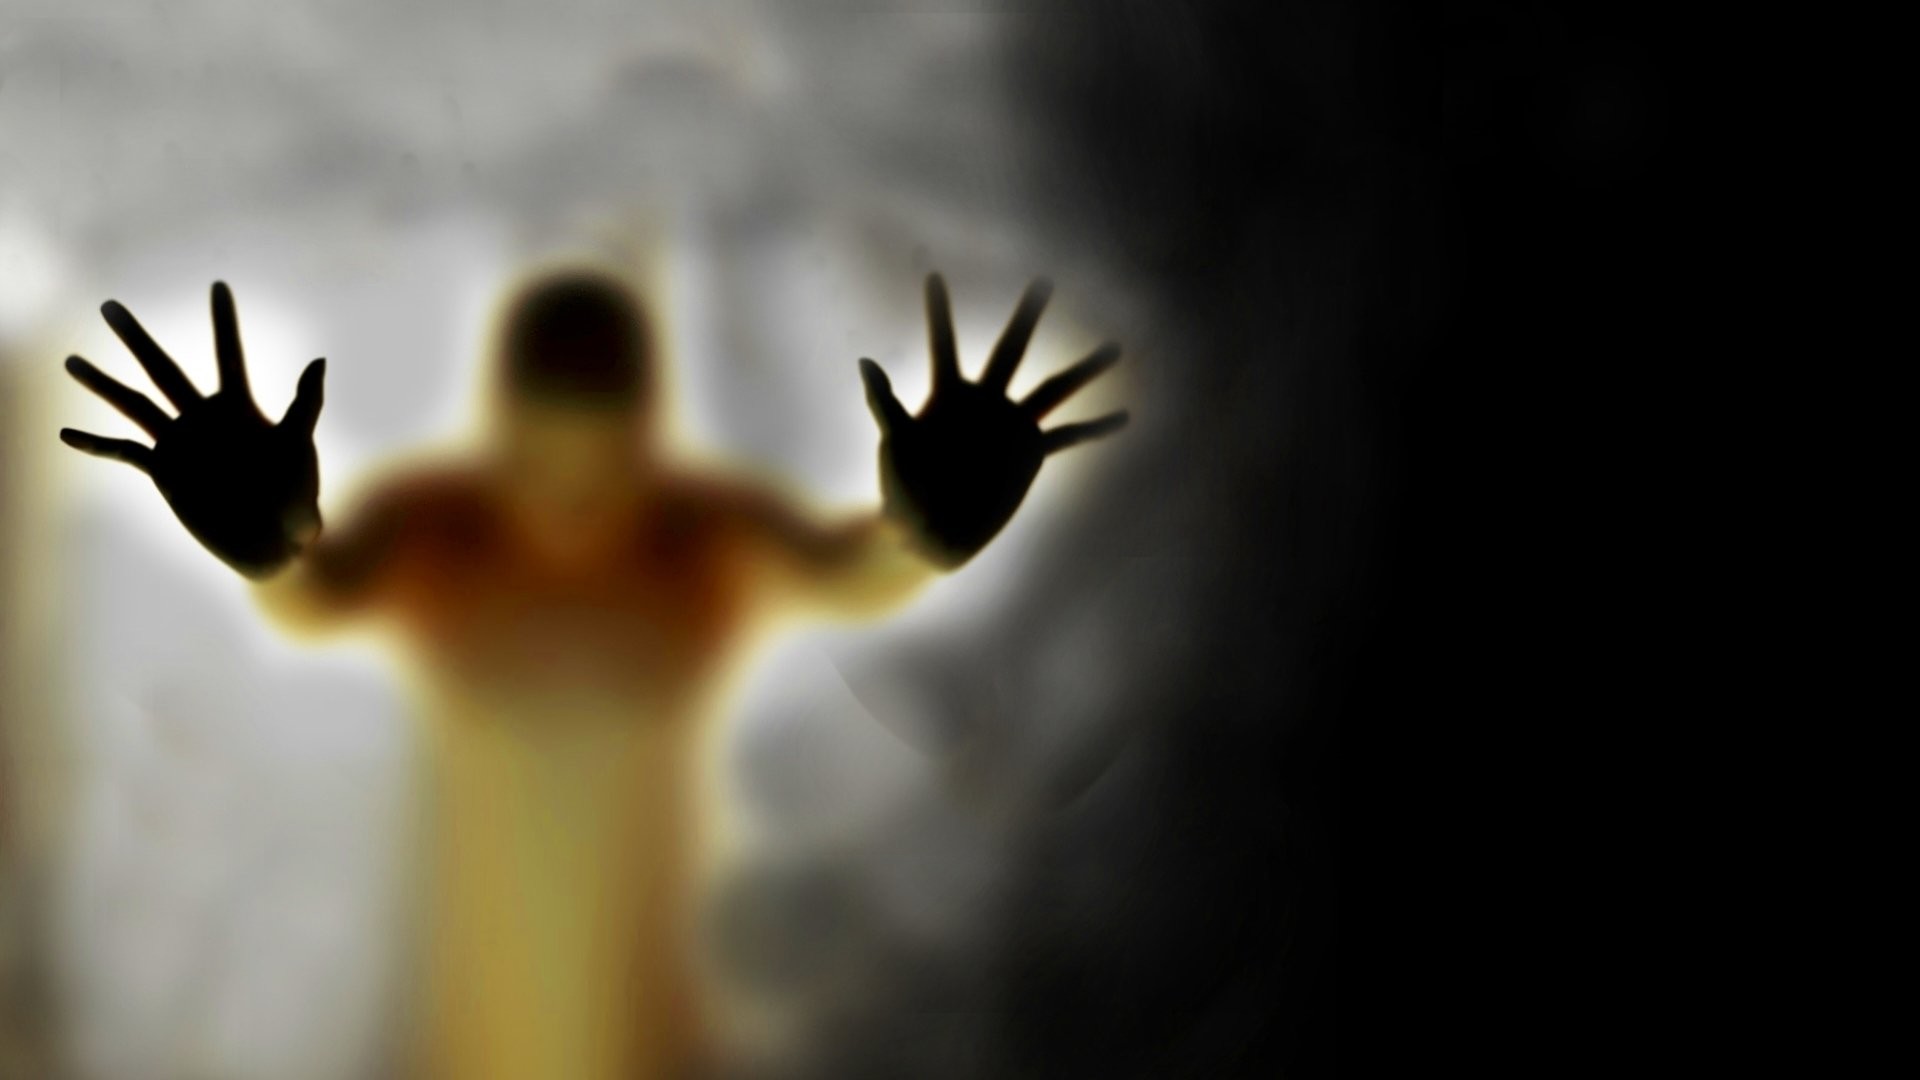 horror wallpaper download,silhouette,shadow,hand,sky,stock photography